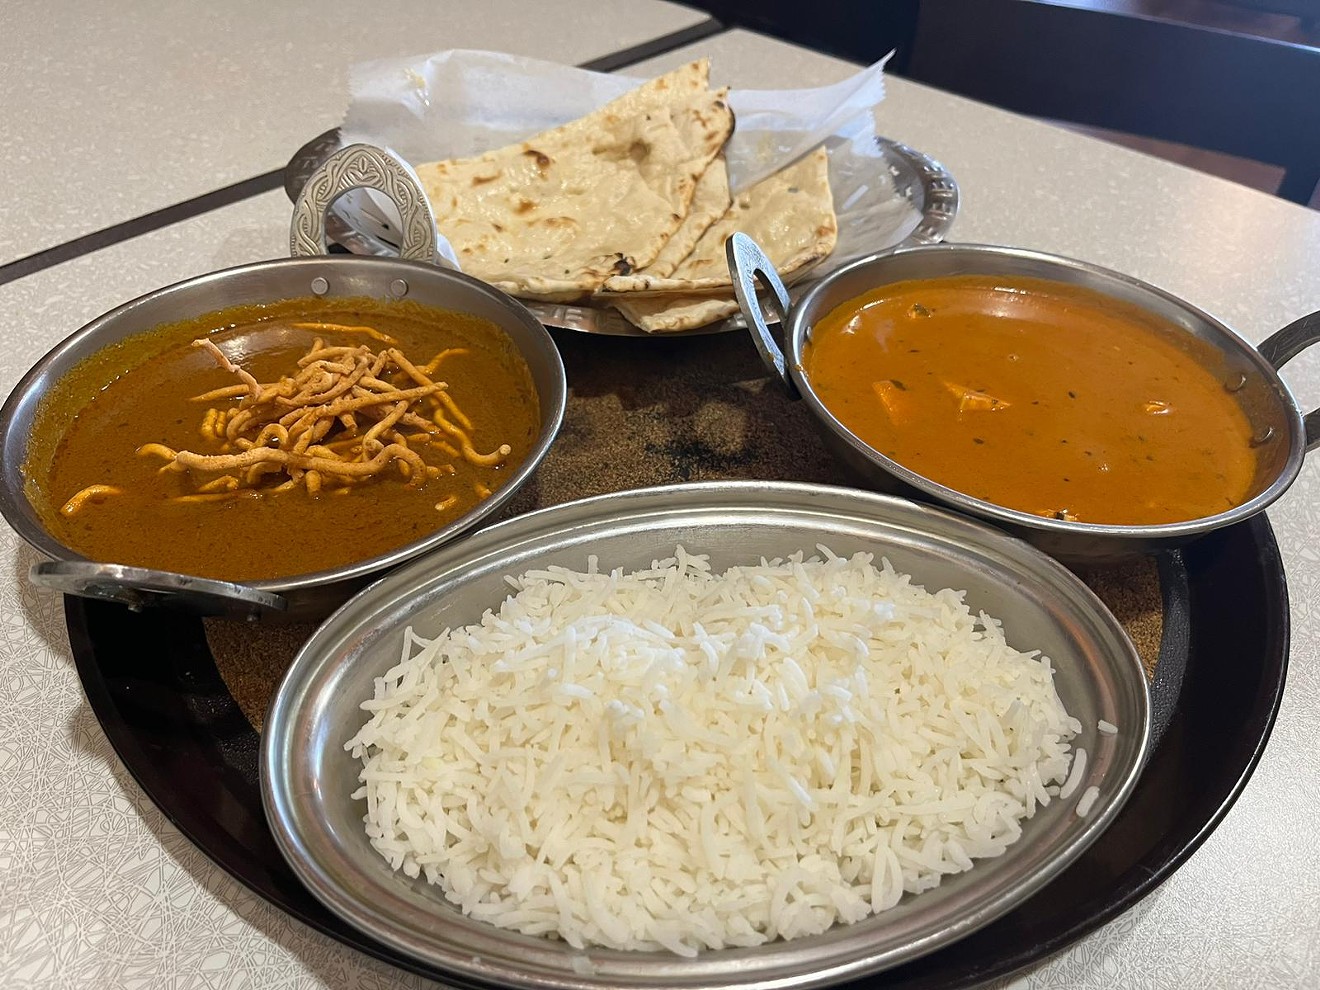 Curry options include a zesty butter paneer and a sev bhaji, with a crunchy flour-based topping. All curries come with a side of rice.